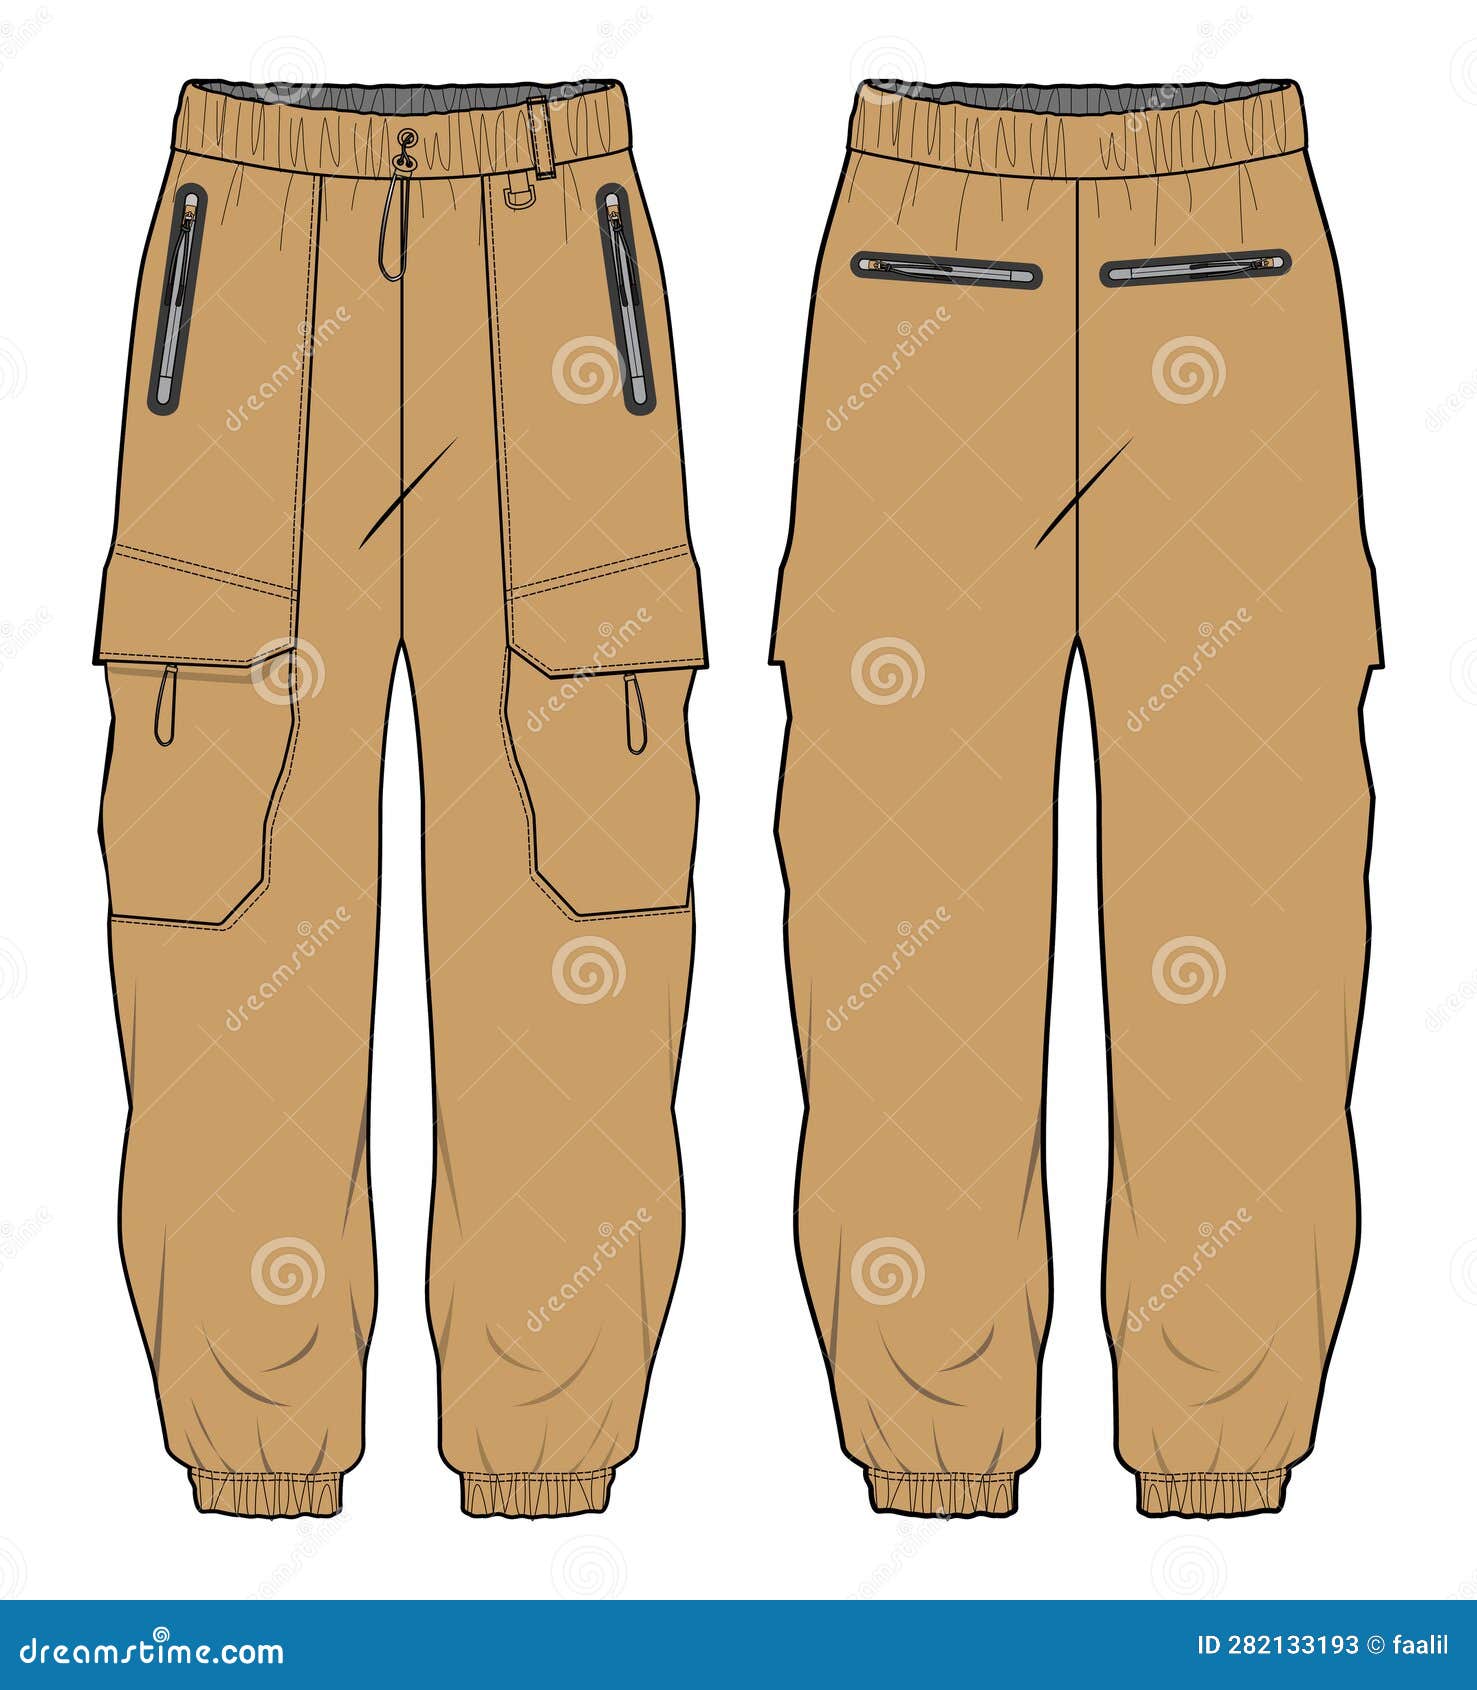 Fashion Study 1 Cargo Pants by Thoughtsreloaded on DeviantArt